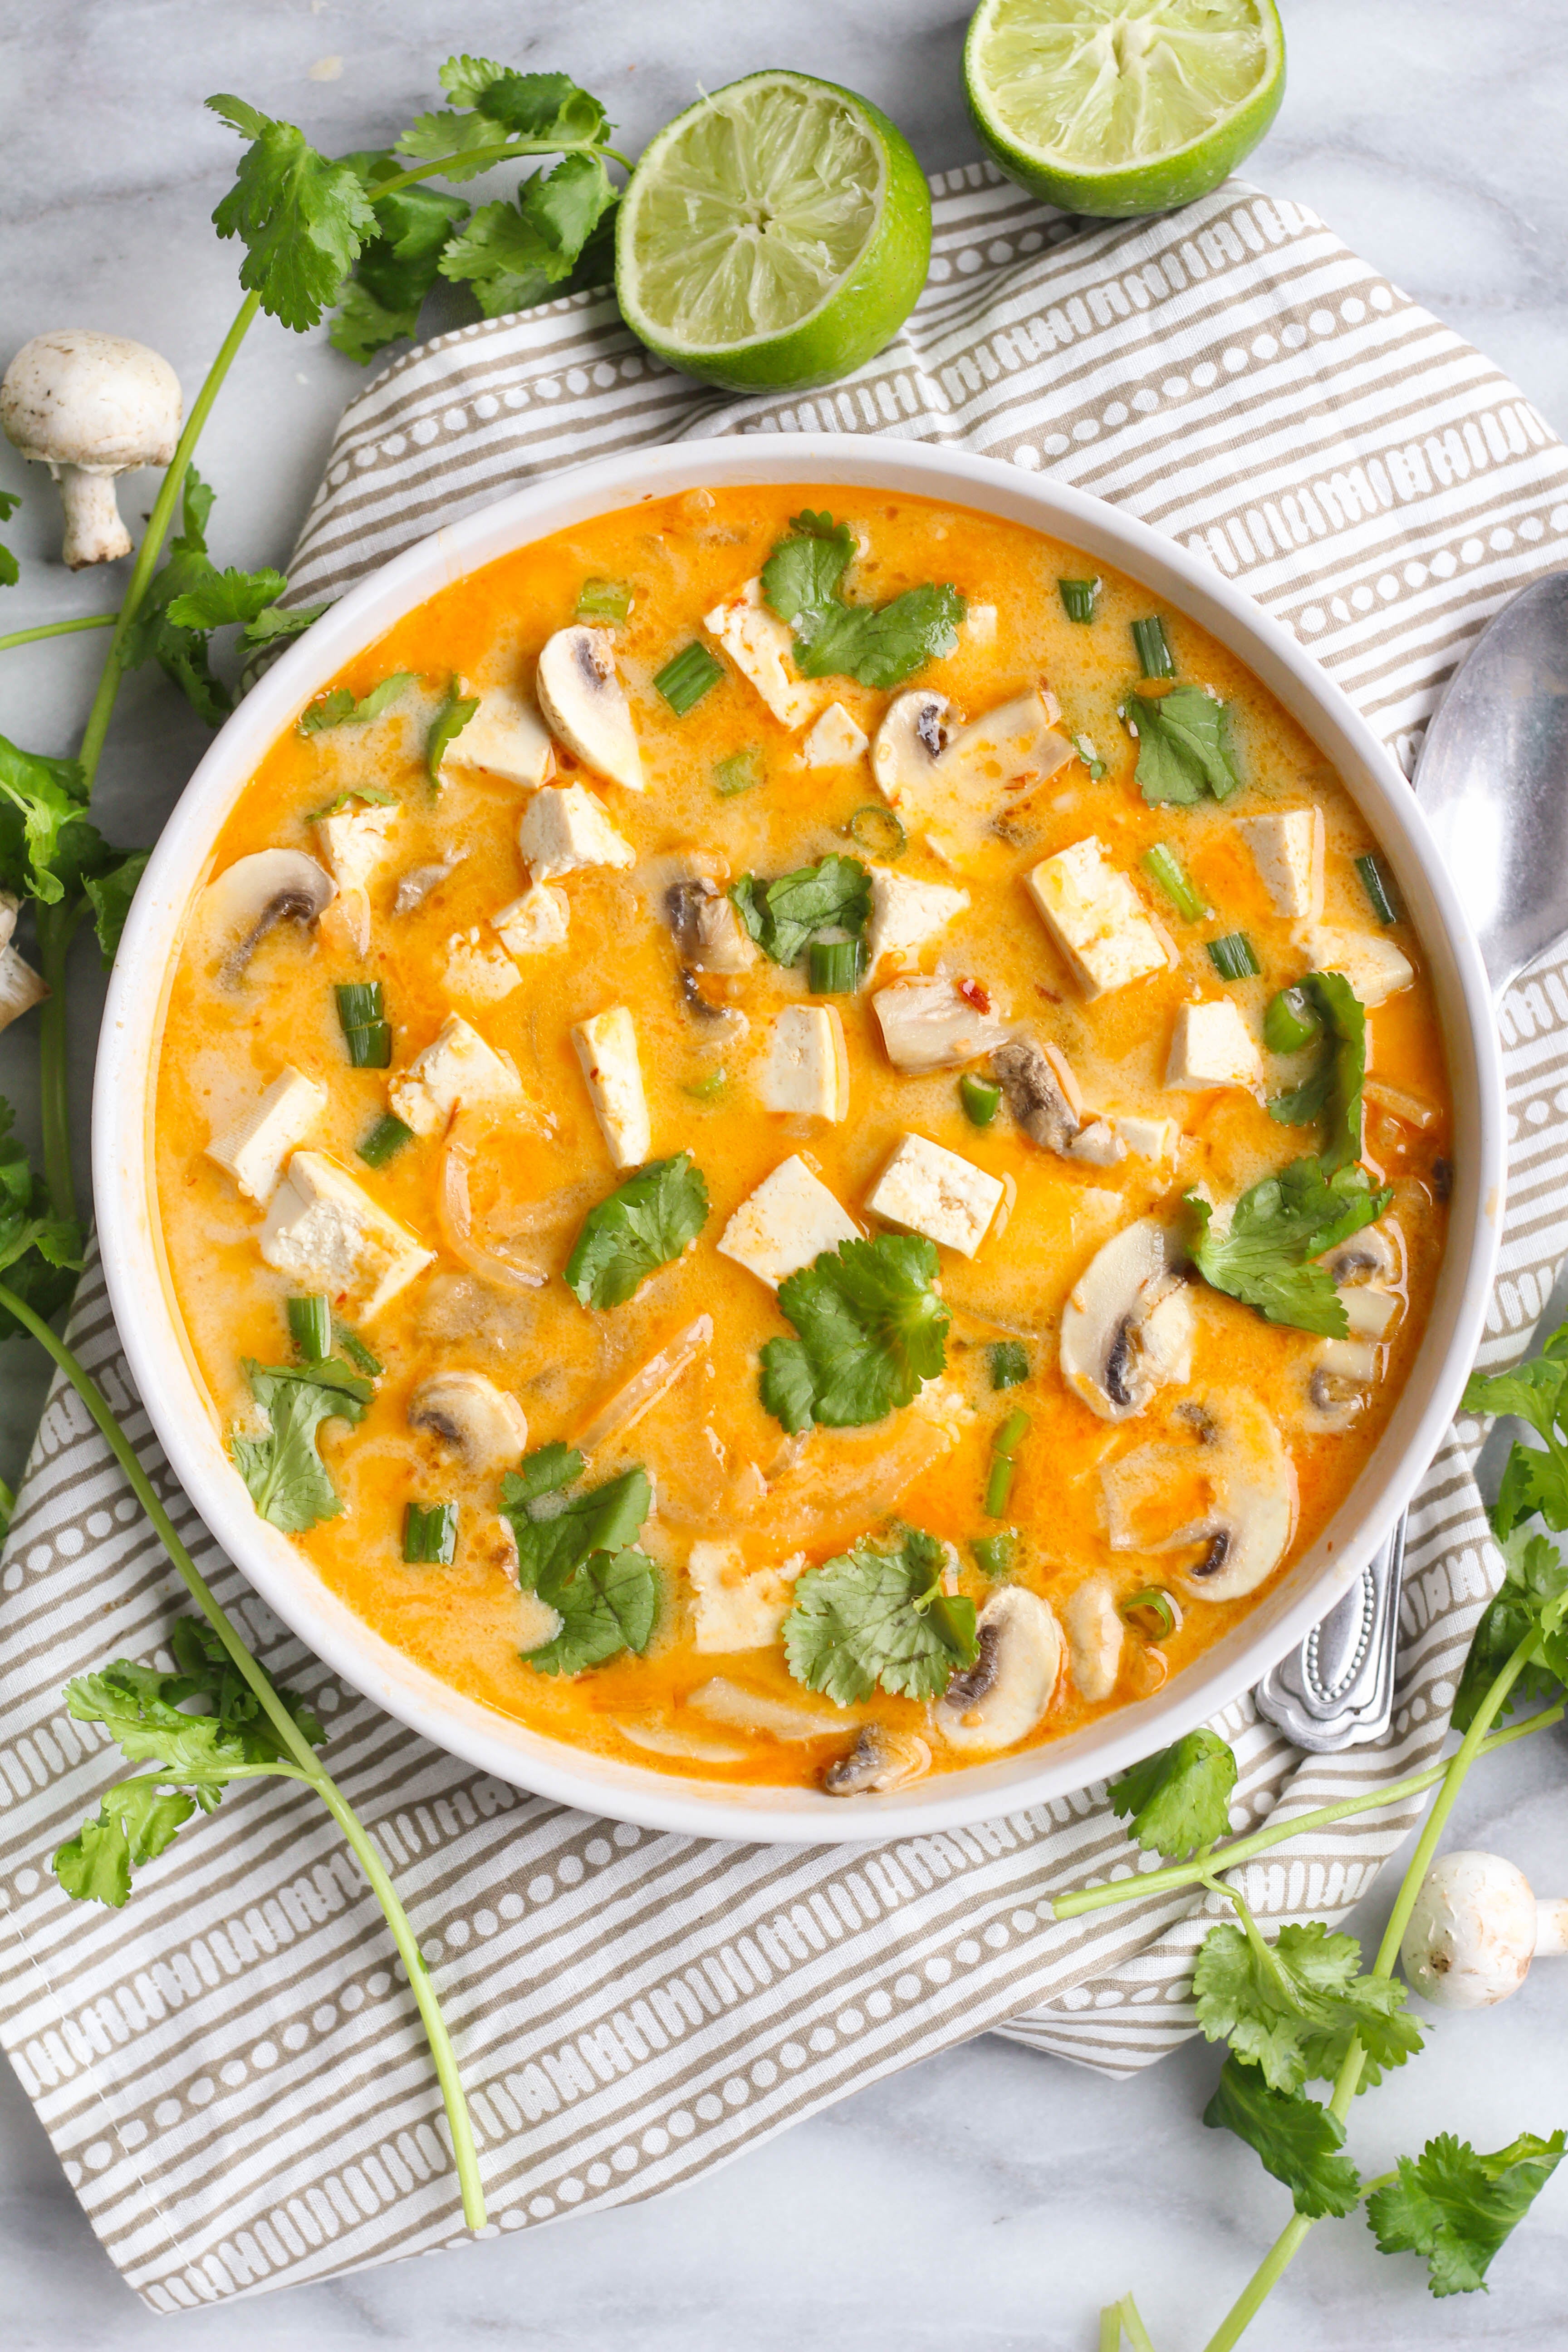 Spicy Thai Coconut Soup (Tom Kha) with Chicken or Tofu